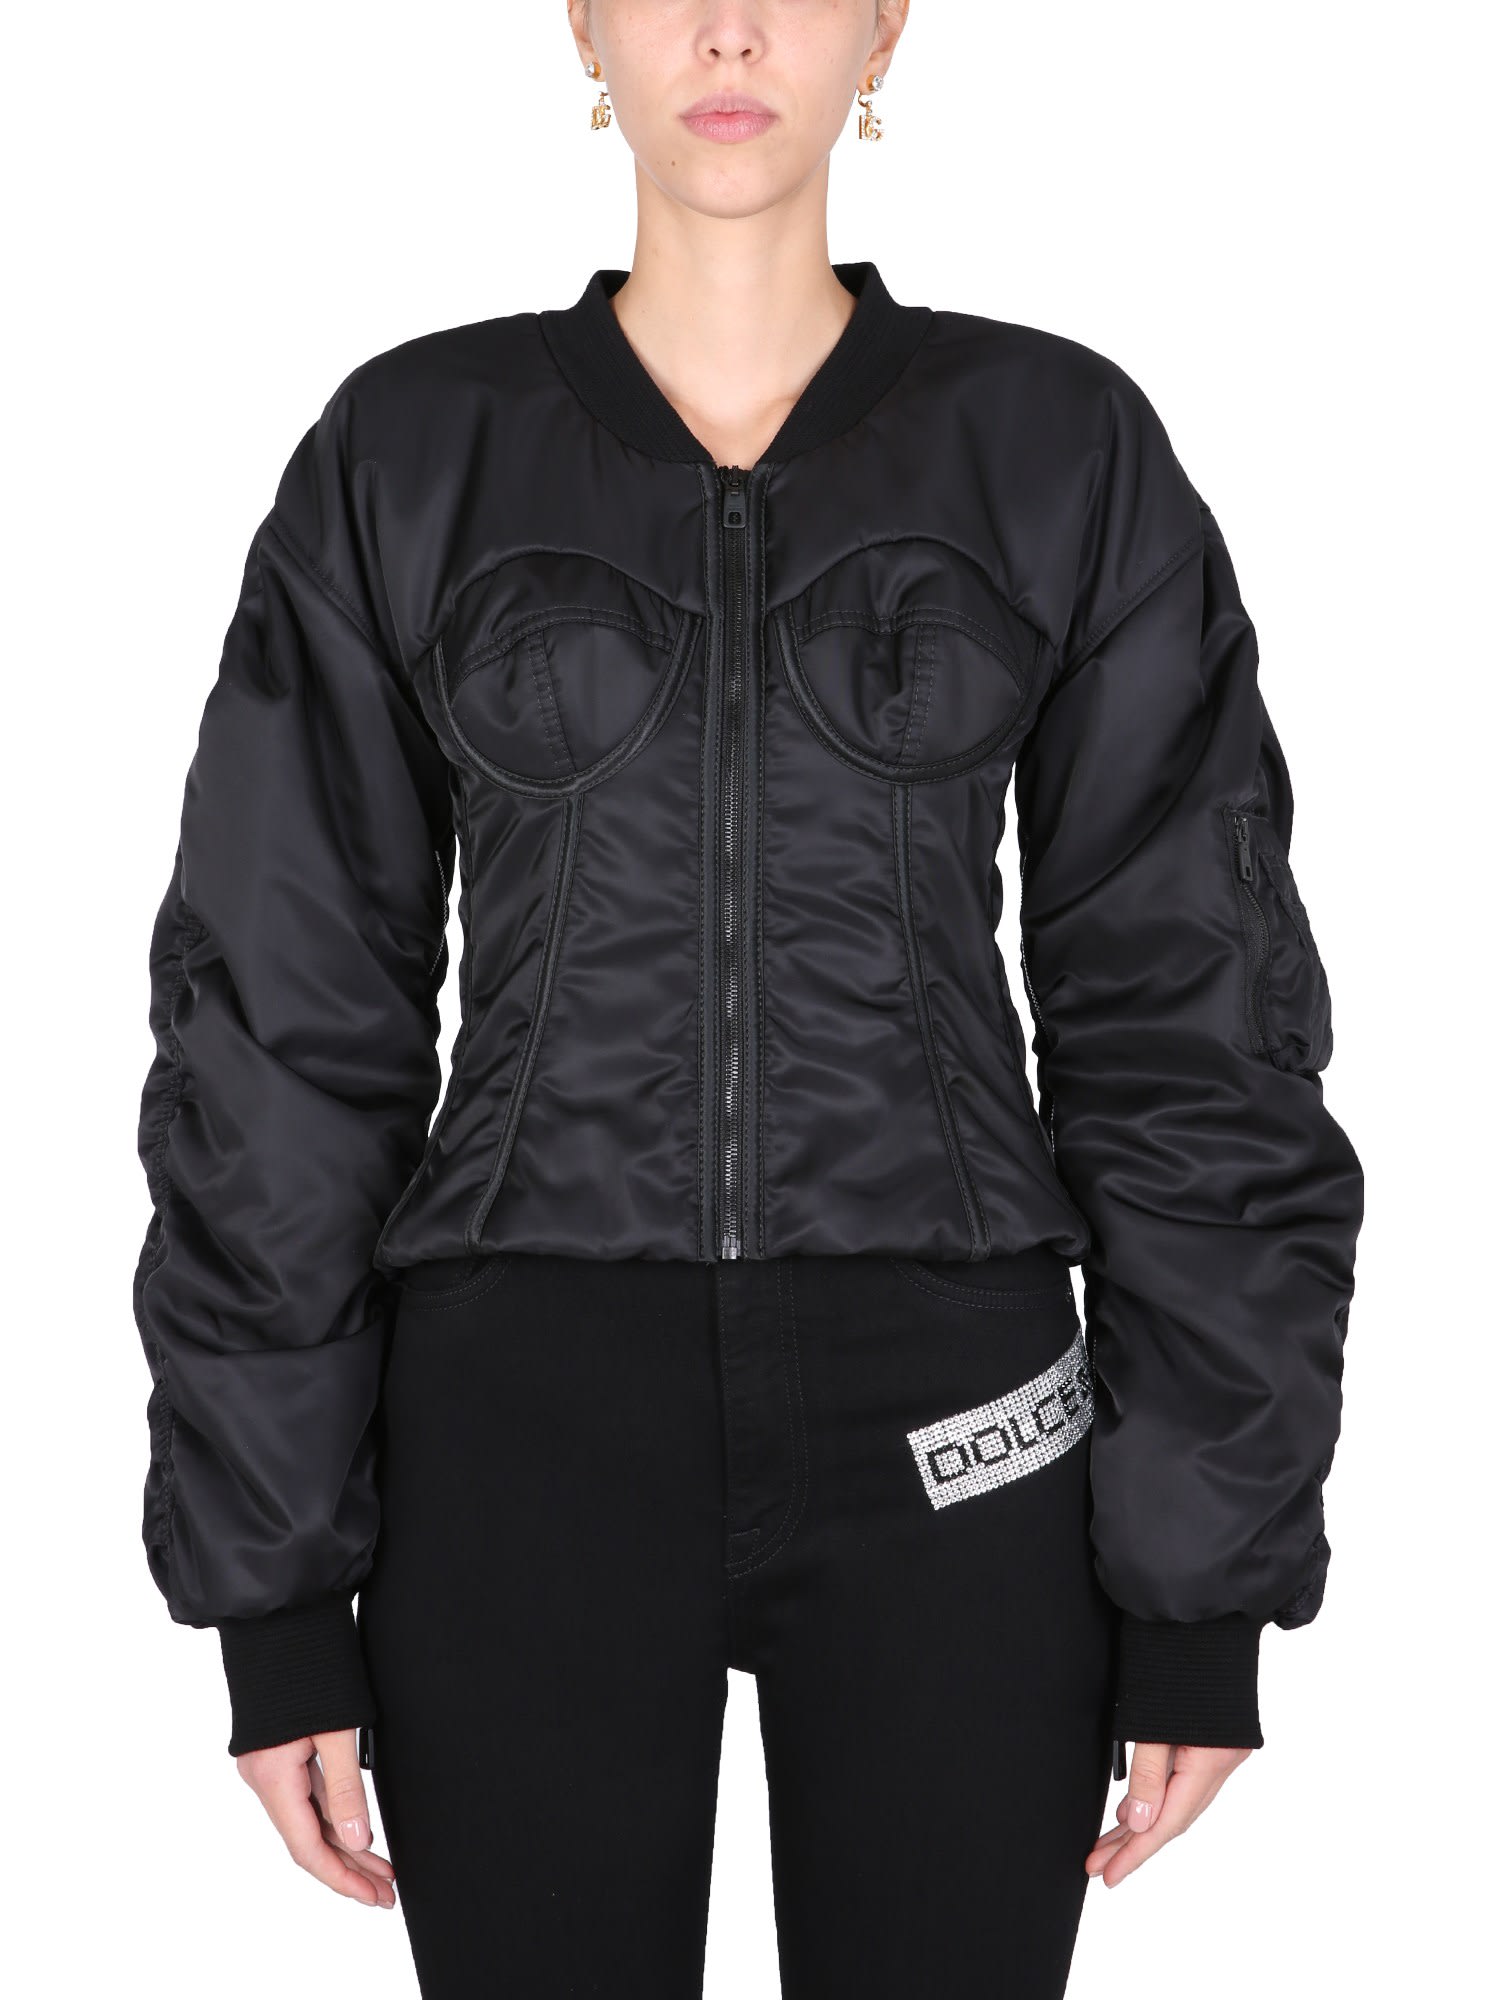 Dolce & Gabbana Bomber With Bustier Details | Coshio Online Shop